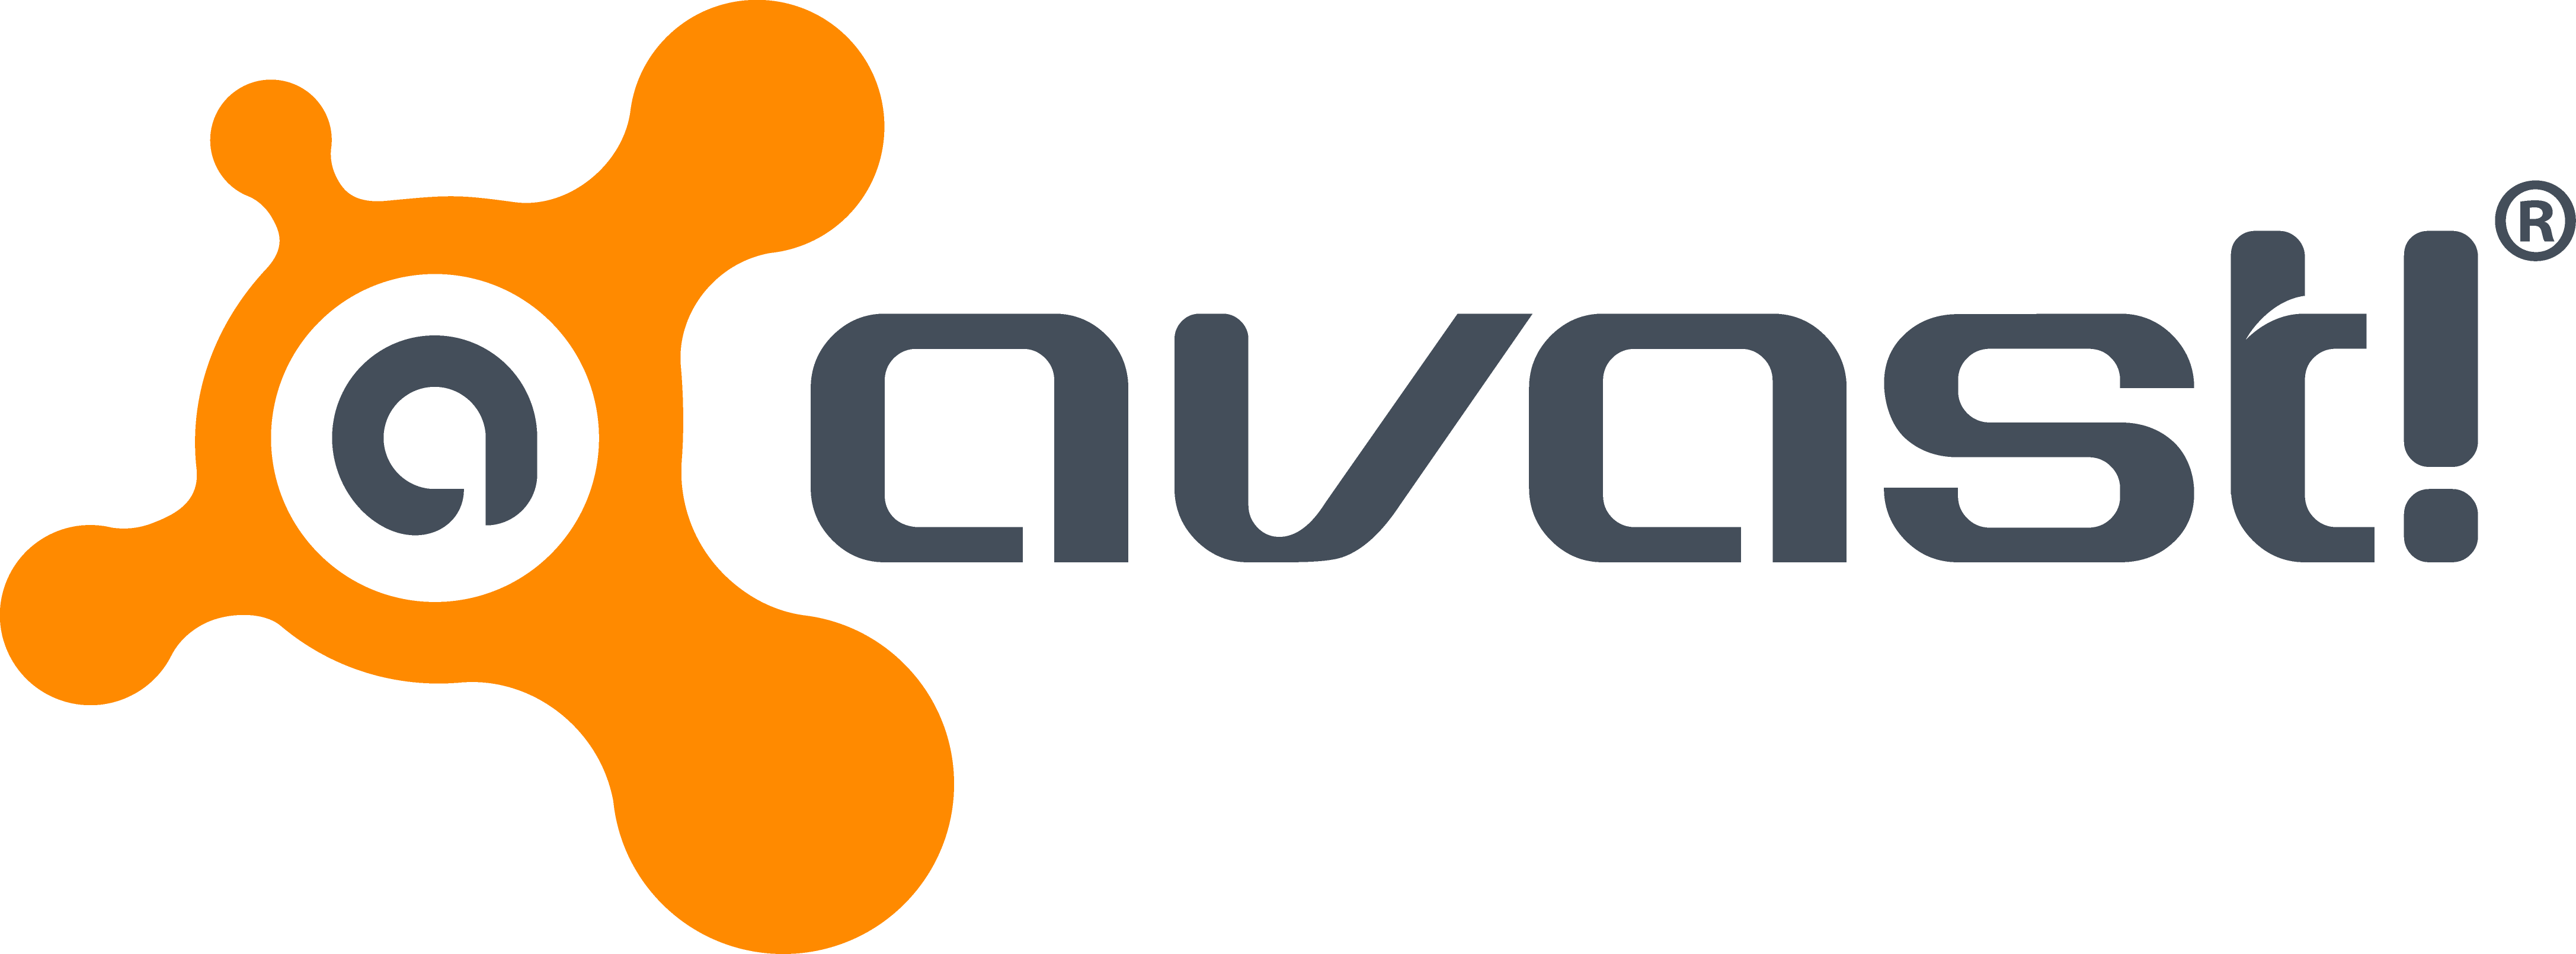 Images/avast.png. - Avast, Transparent background PNG HD thumbnail